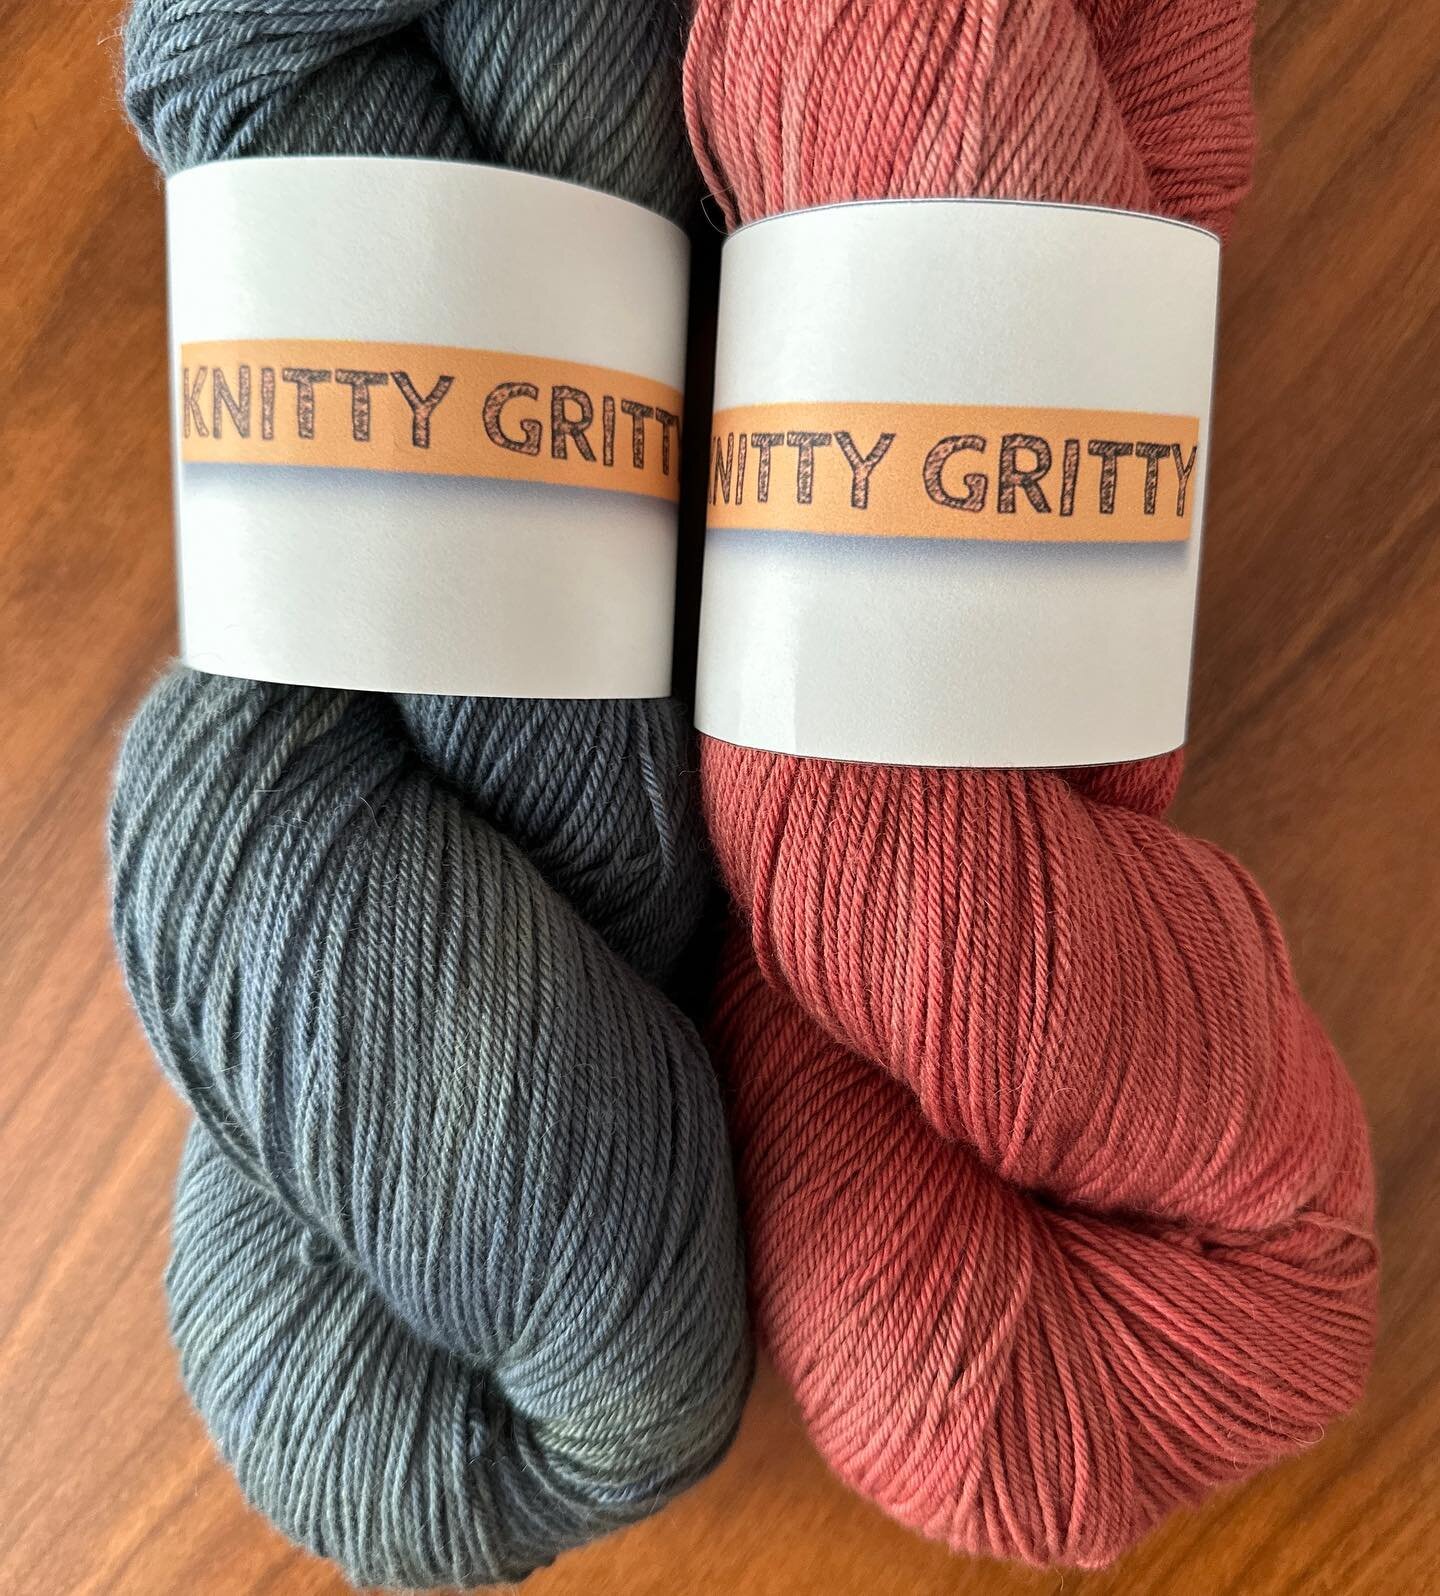 This beautiful yarn is by knitting gritty.com. Check them out and read about them. Interesting. Also, there is a new tutorial on my website. See link in bio.
#yarnlove #knittinginspiration #knitterofinstagram